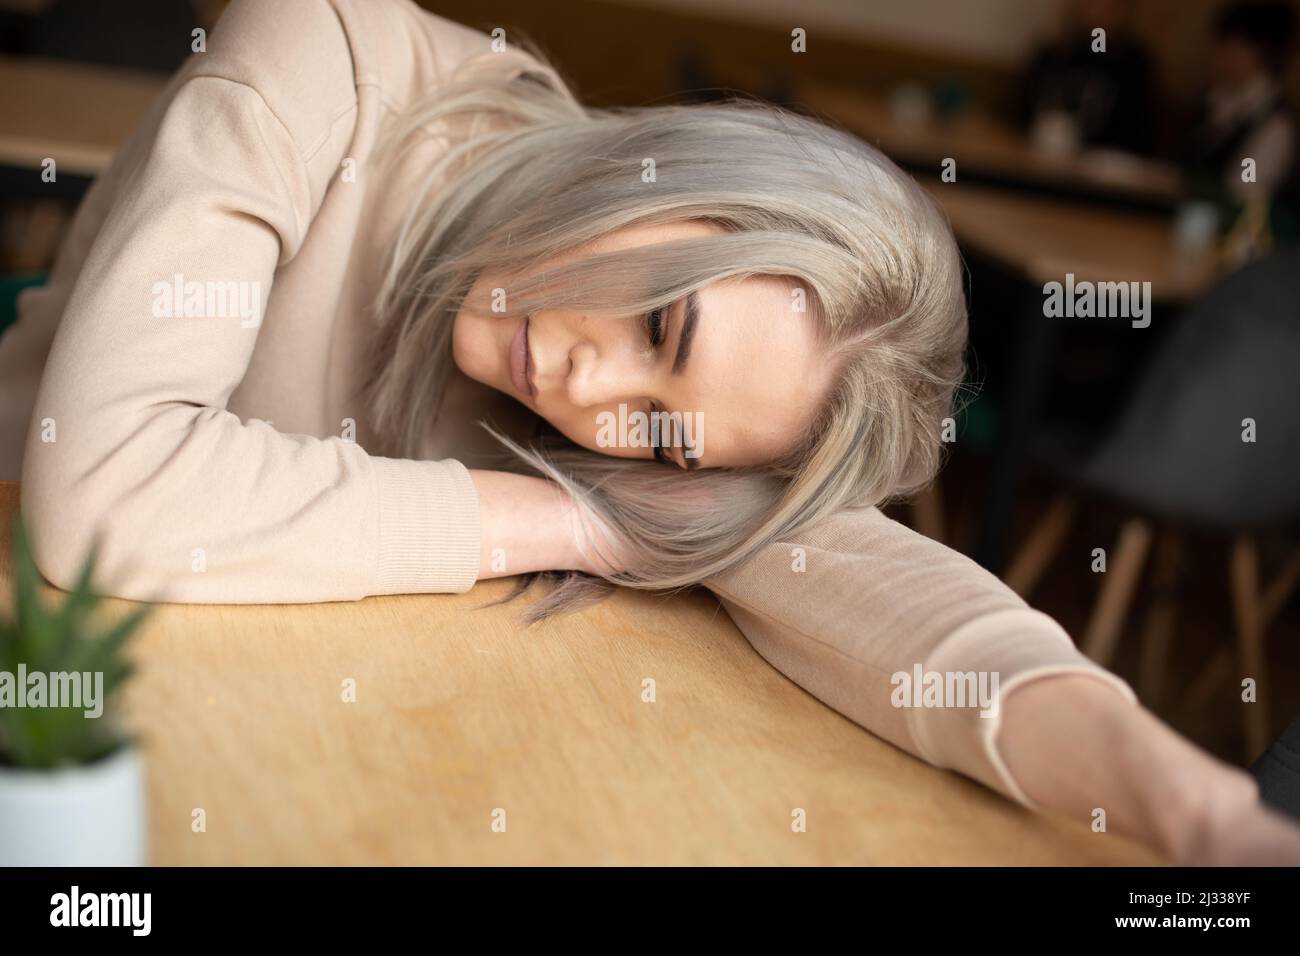 Portrait of young attractive pensive woman with long grey hair with make-up in sweatshirt laying head on hand on table. Stock Photo